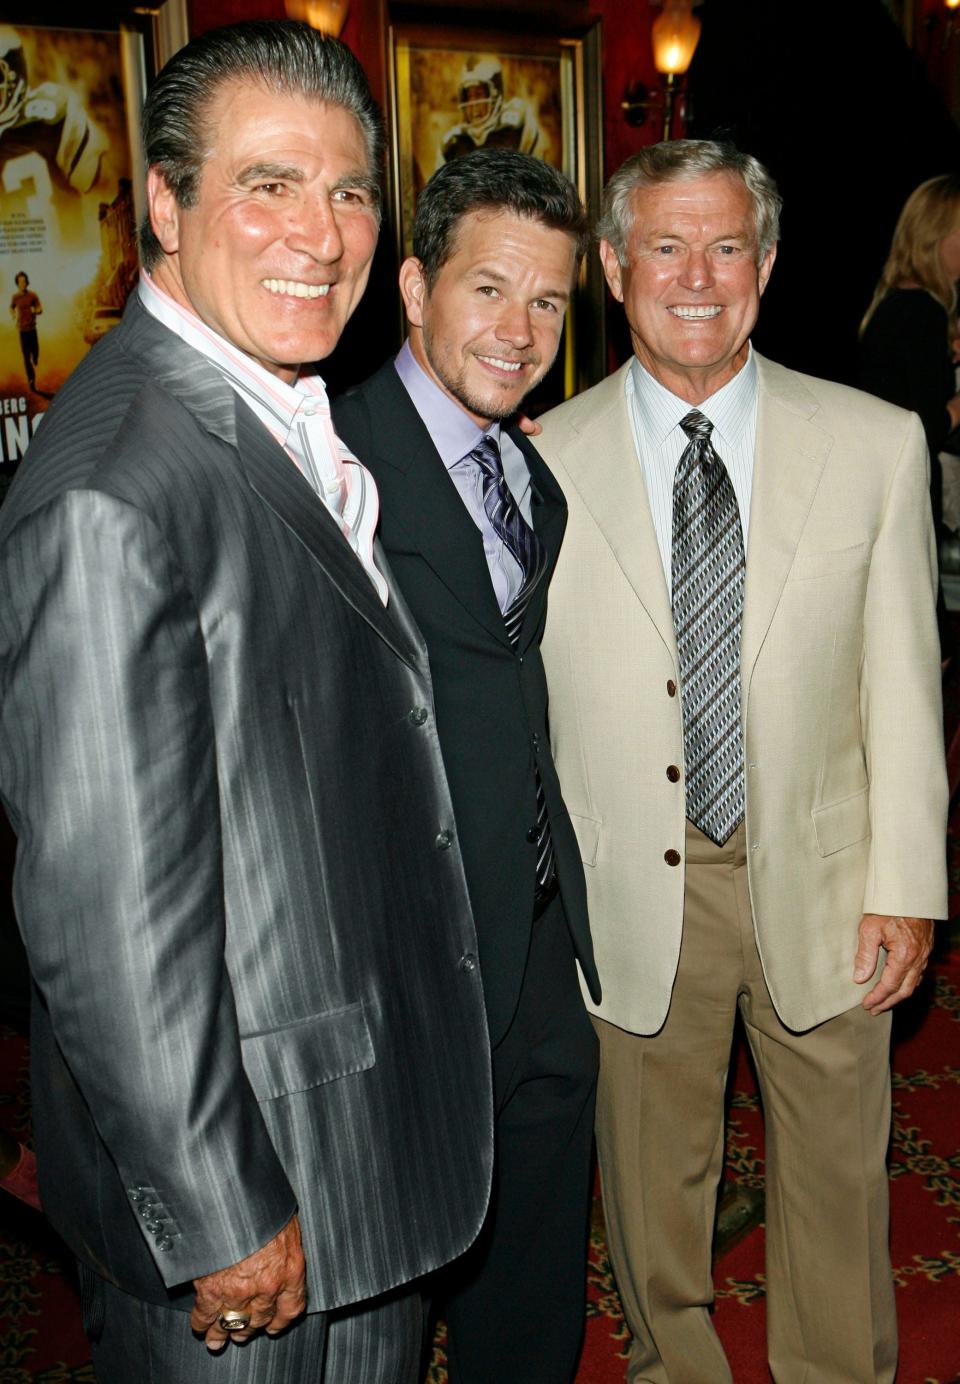 From left, Vince Papale, actor Mark Wahlberg and former Eagles coach Dick Vermeil, pose for photographers during red carpet arrivals at the world premiere of the film "Invincible" in 2006.